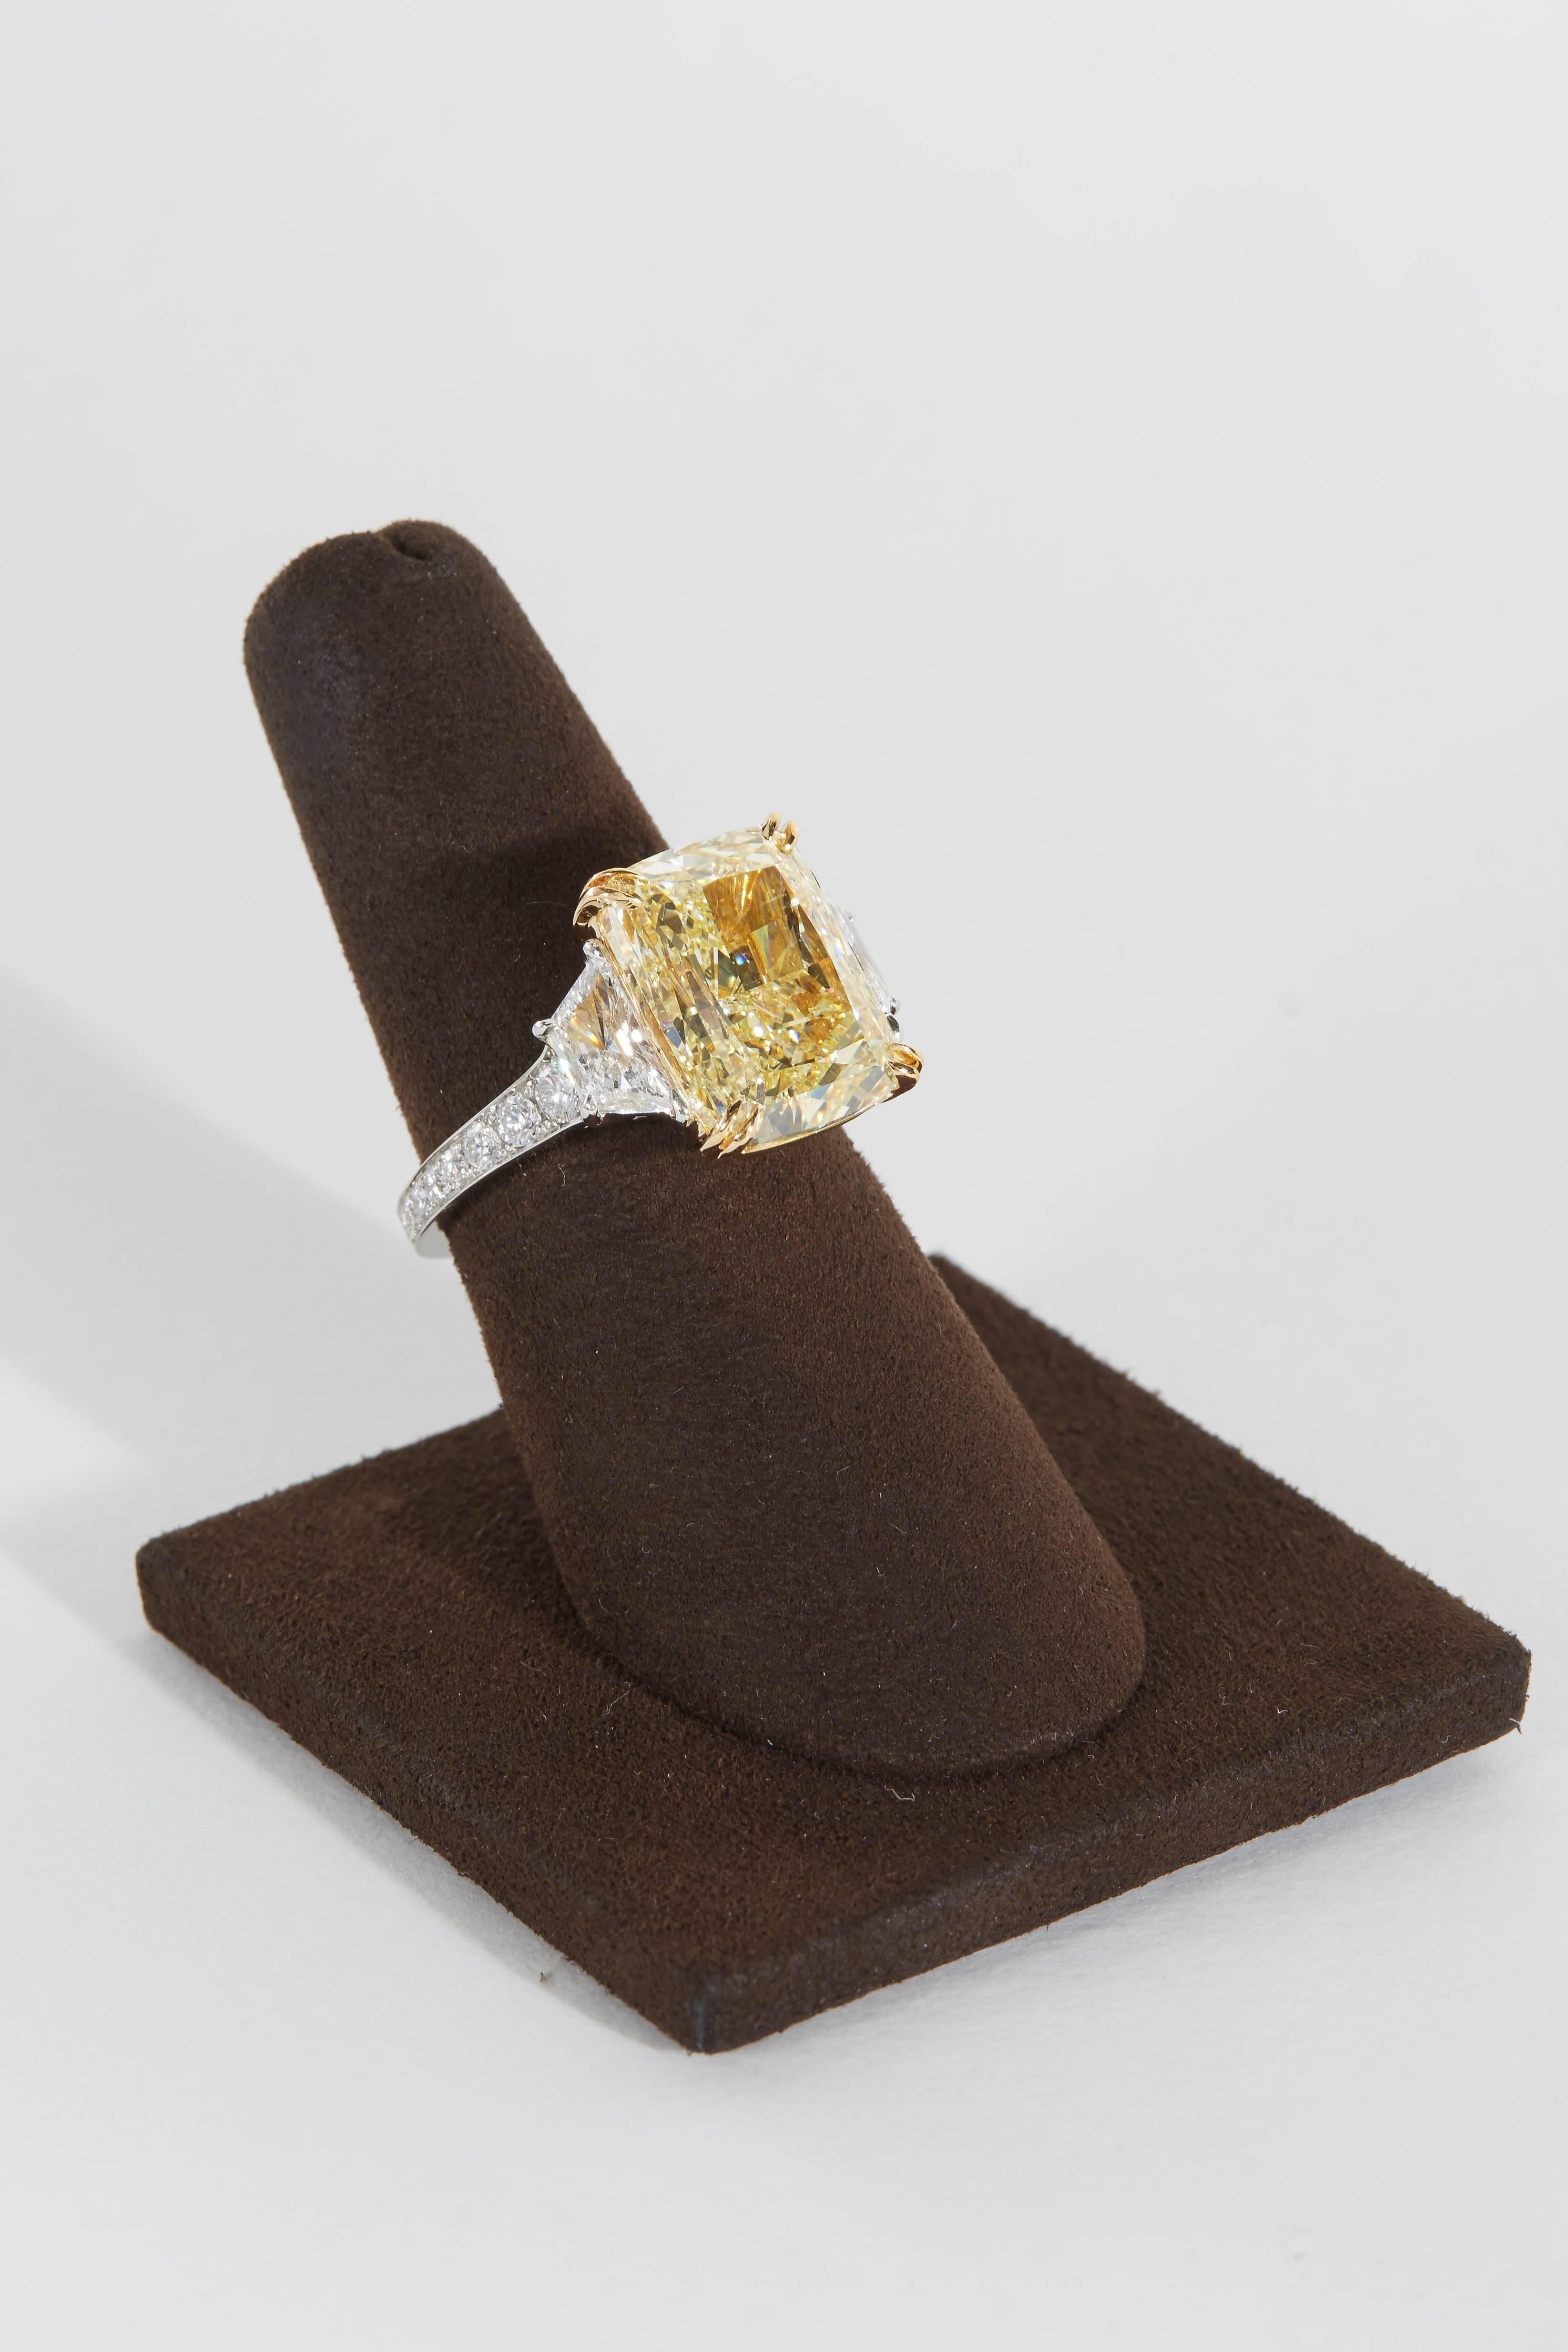 

An amazing diamond full of sparkle and brilliance! A rare and most sought after rectangular shape!

GIA certified Fancy Yellow 10.17 carat SI2 center diamond.

1.55 carats of white diamonds set along the side of the center and along the band.